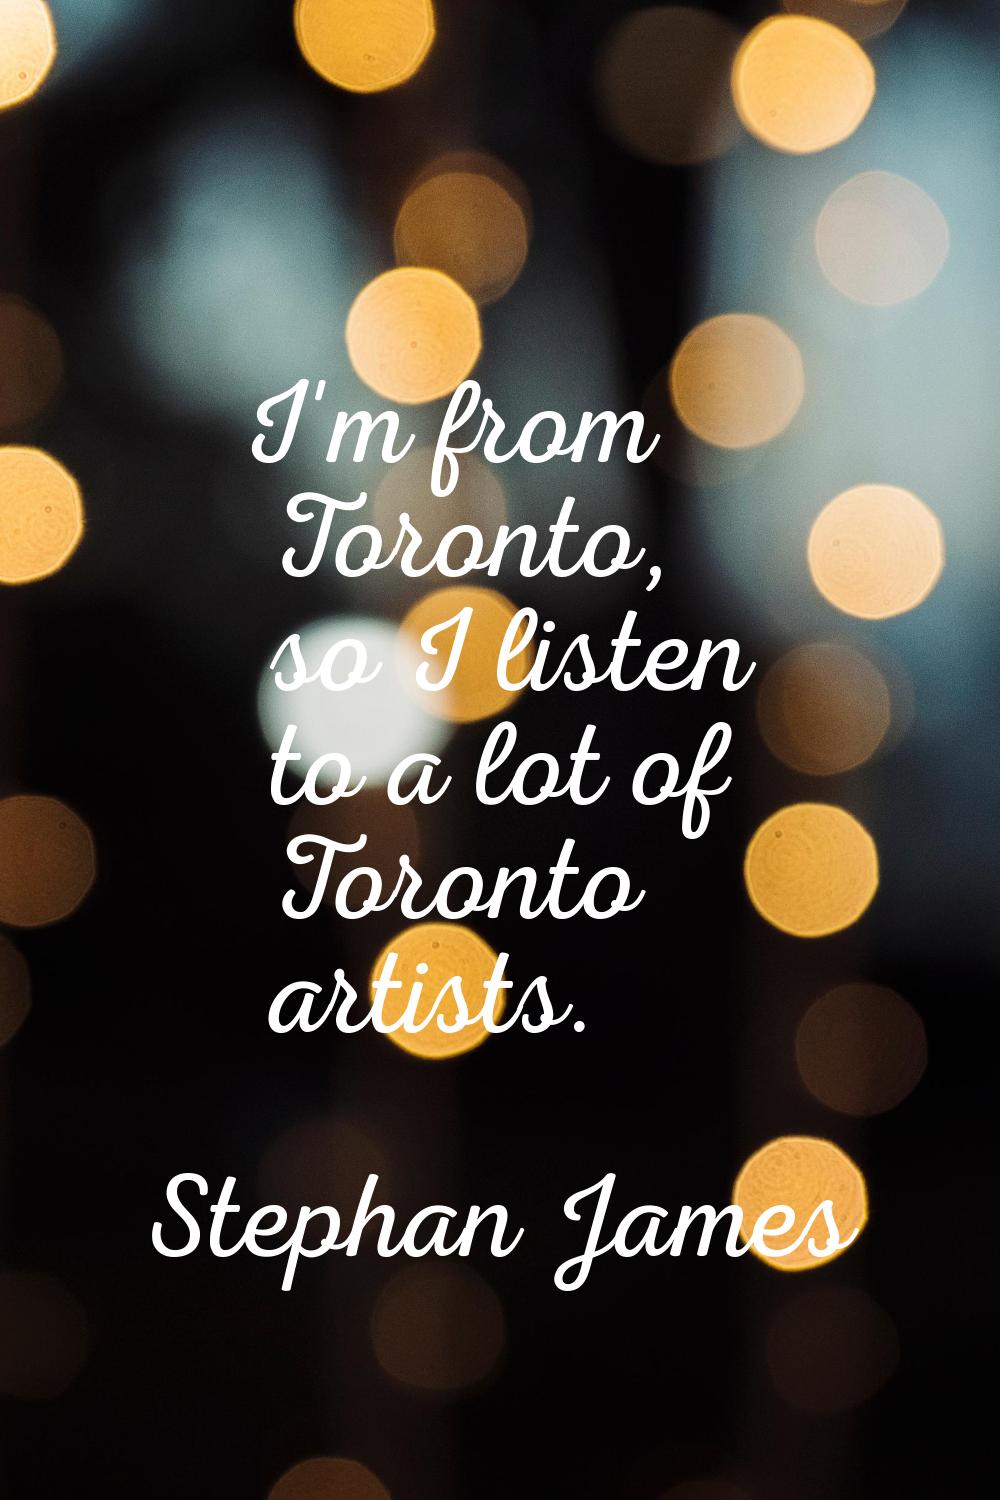 I'm from Toronto, so I listen to a lot of Toronto artists.